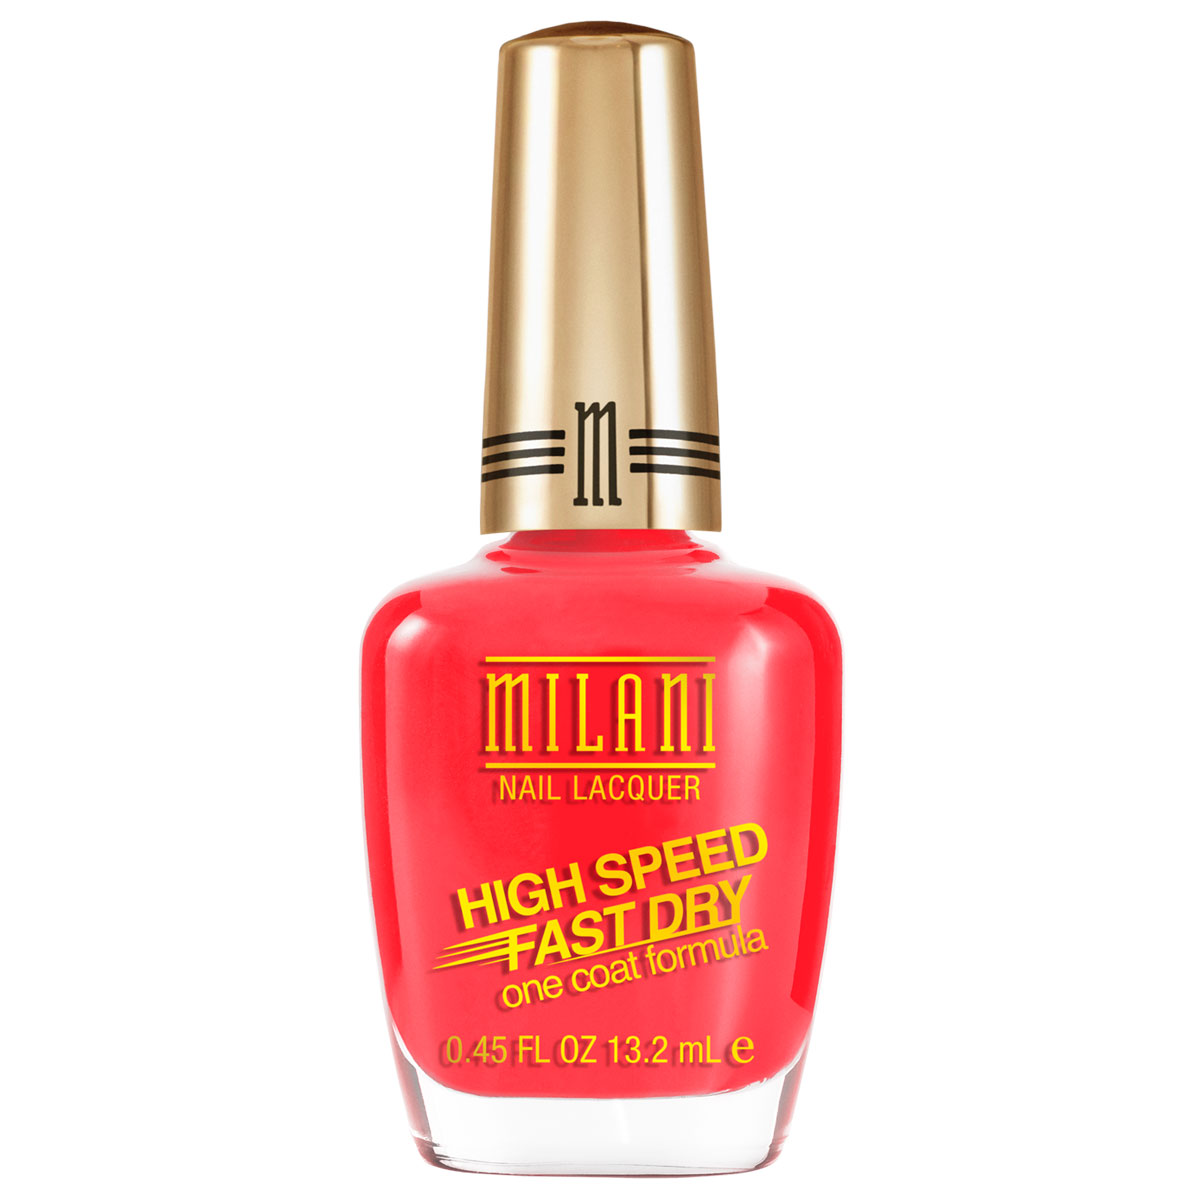 Milani High Speed Fast Dry Nail Lacquer Flaming Race